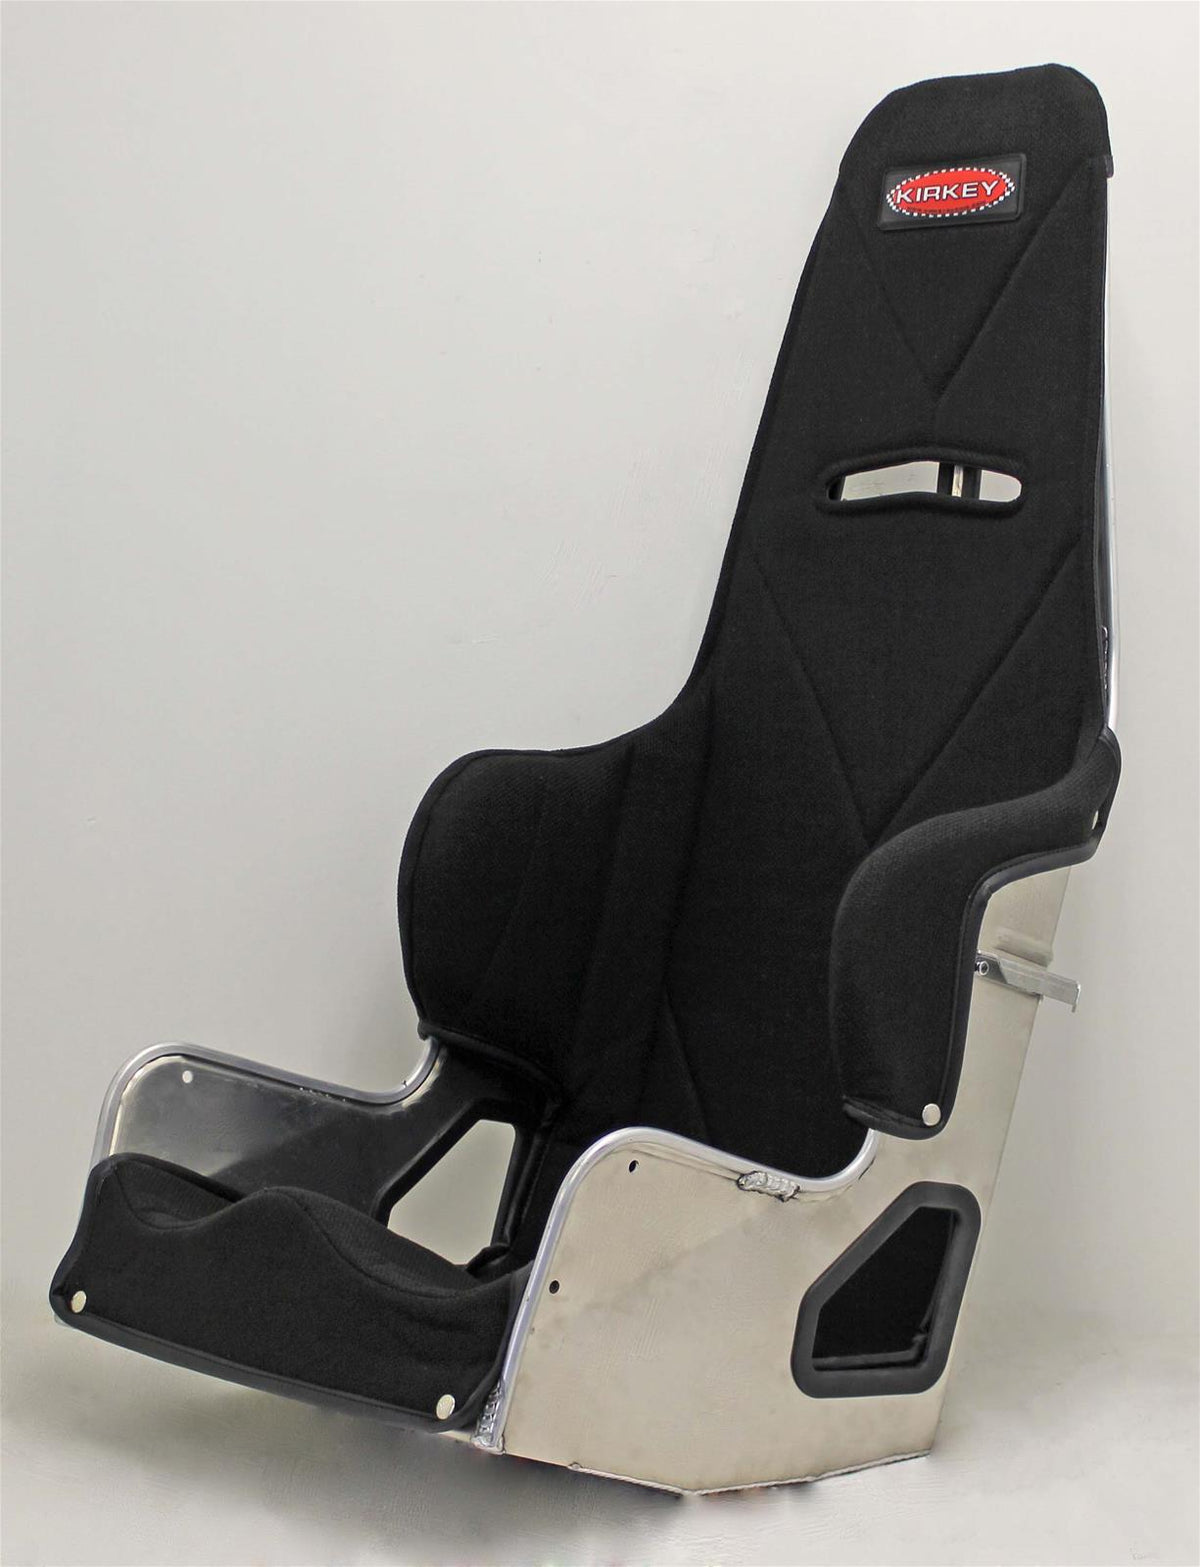 38 Series Seat Cover